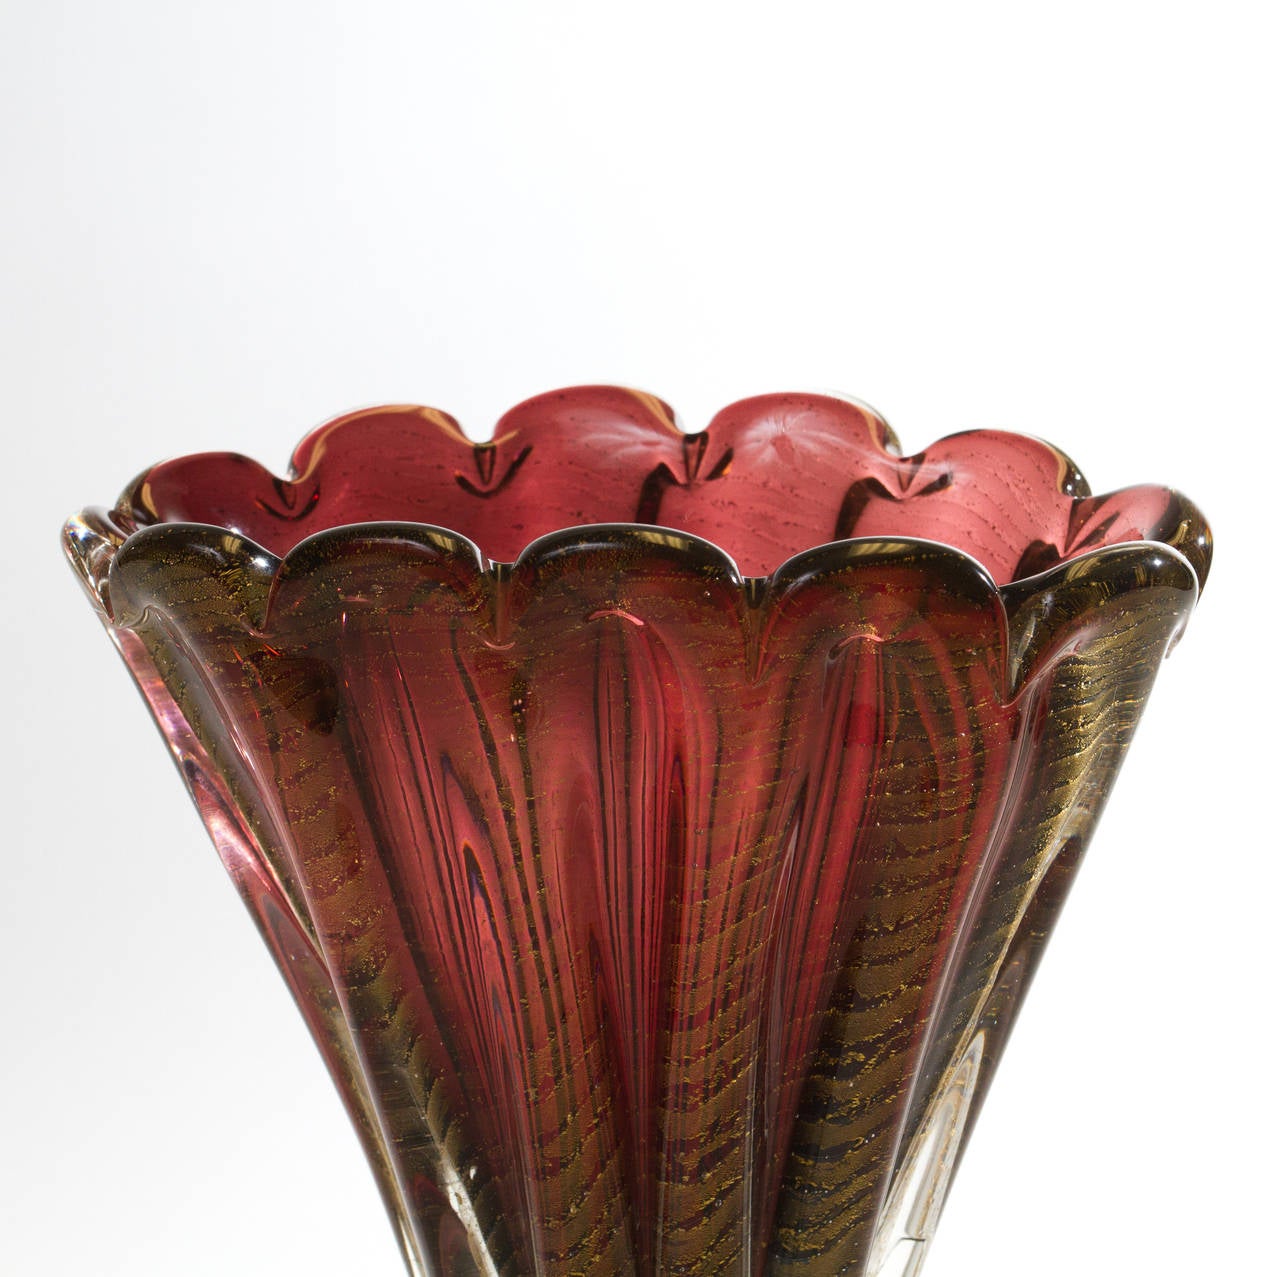 Reeded purple Murano glass vase with golf flecks inclusions by Barovier e Toso.